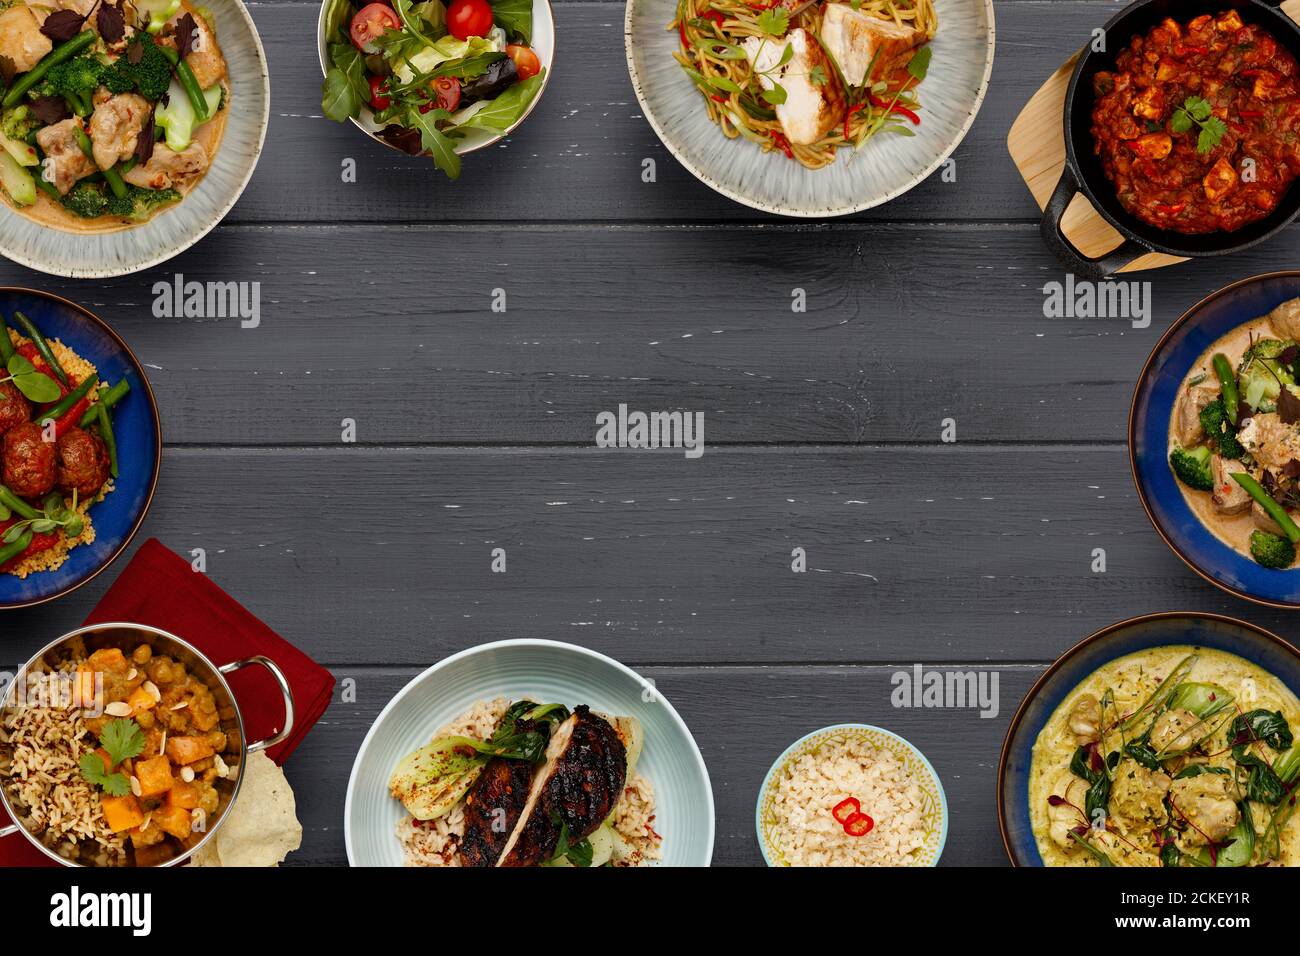 A border of bowls of delicious asian food, curries, chicken chow mein noodles, balti dishes, vegetable curries, on a dark wooden background with space Stock Photo